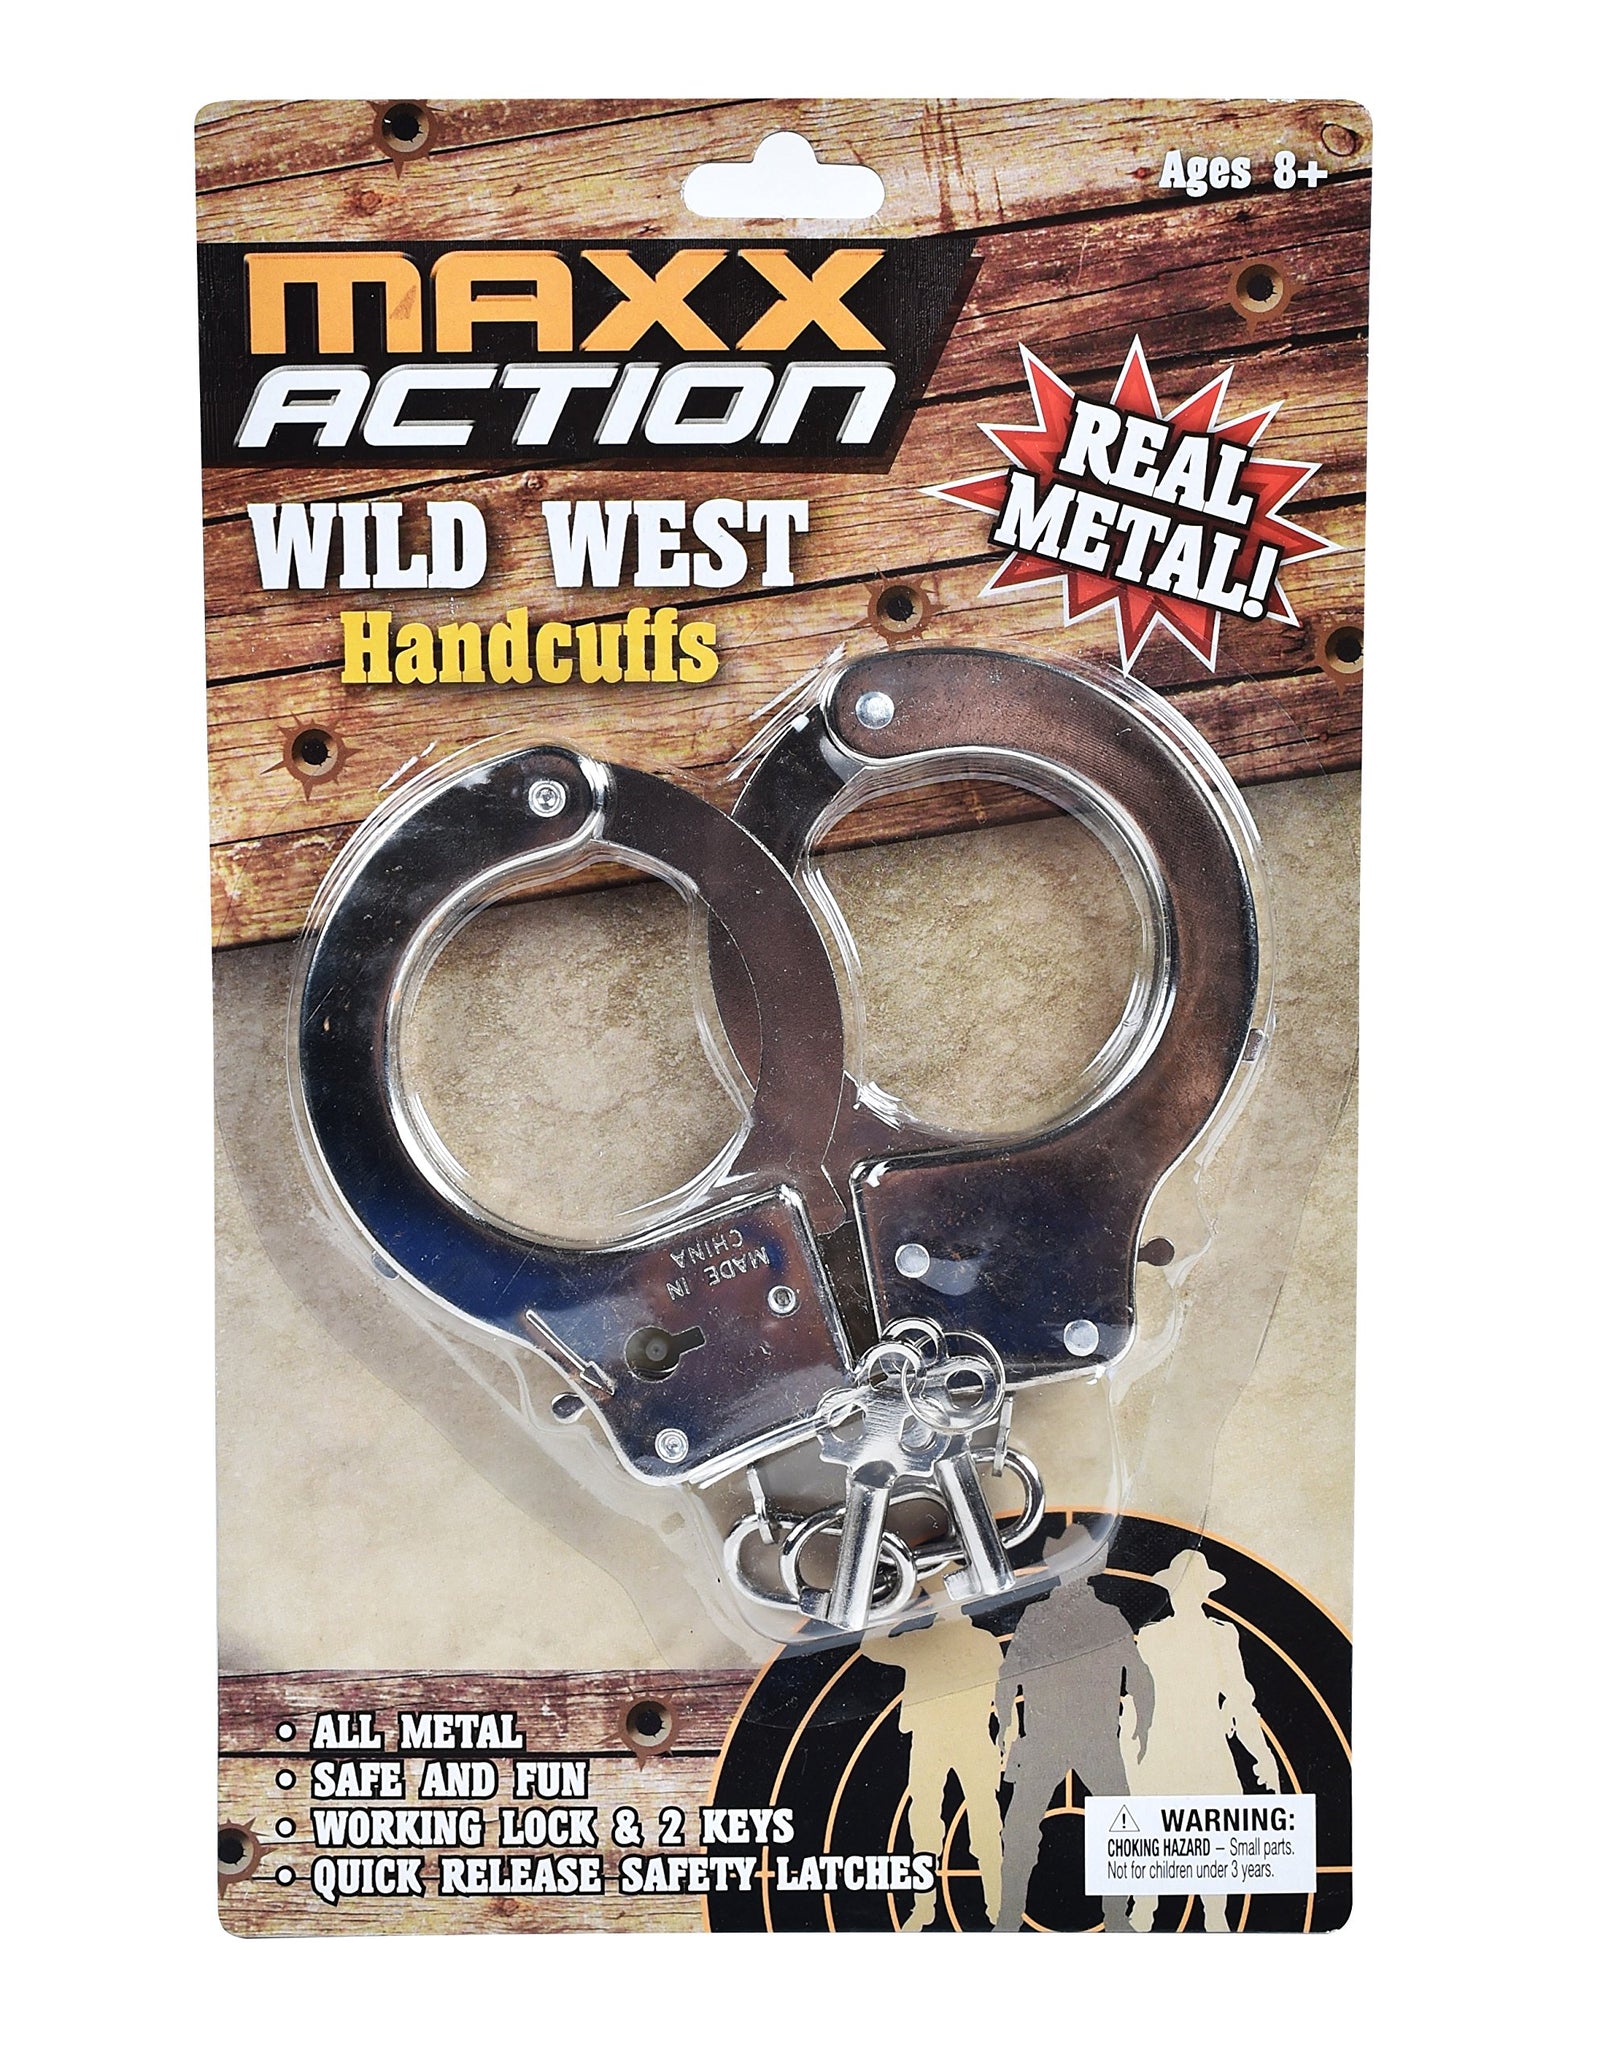 Sunny Days Entertainment Wild West Deluxe Toy Marshall Cuffs with Key – Western Handcuffs Role Play Toys | Cowboy Sheriff Police Costume for Kids | Two Keys with Safety Release – Maxx Action, Original Version, Basic pack